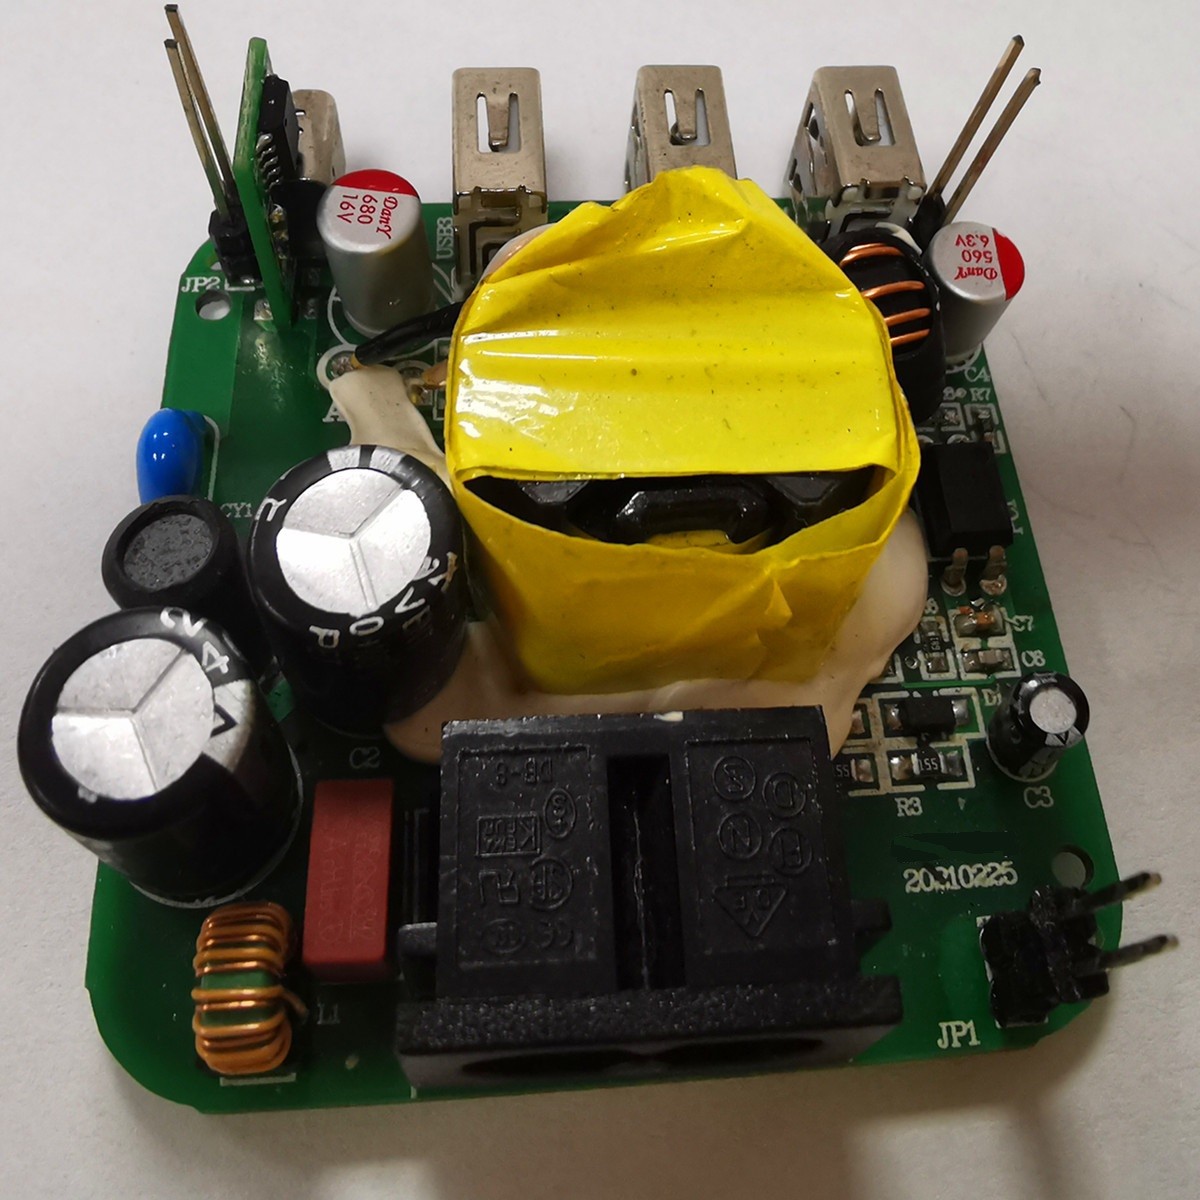 Multi USB Charger Electronic Board Assembly mobile charge pcba board service manufacturer